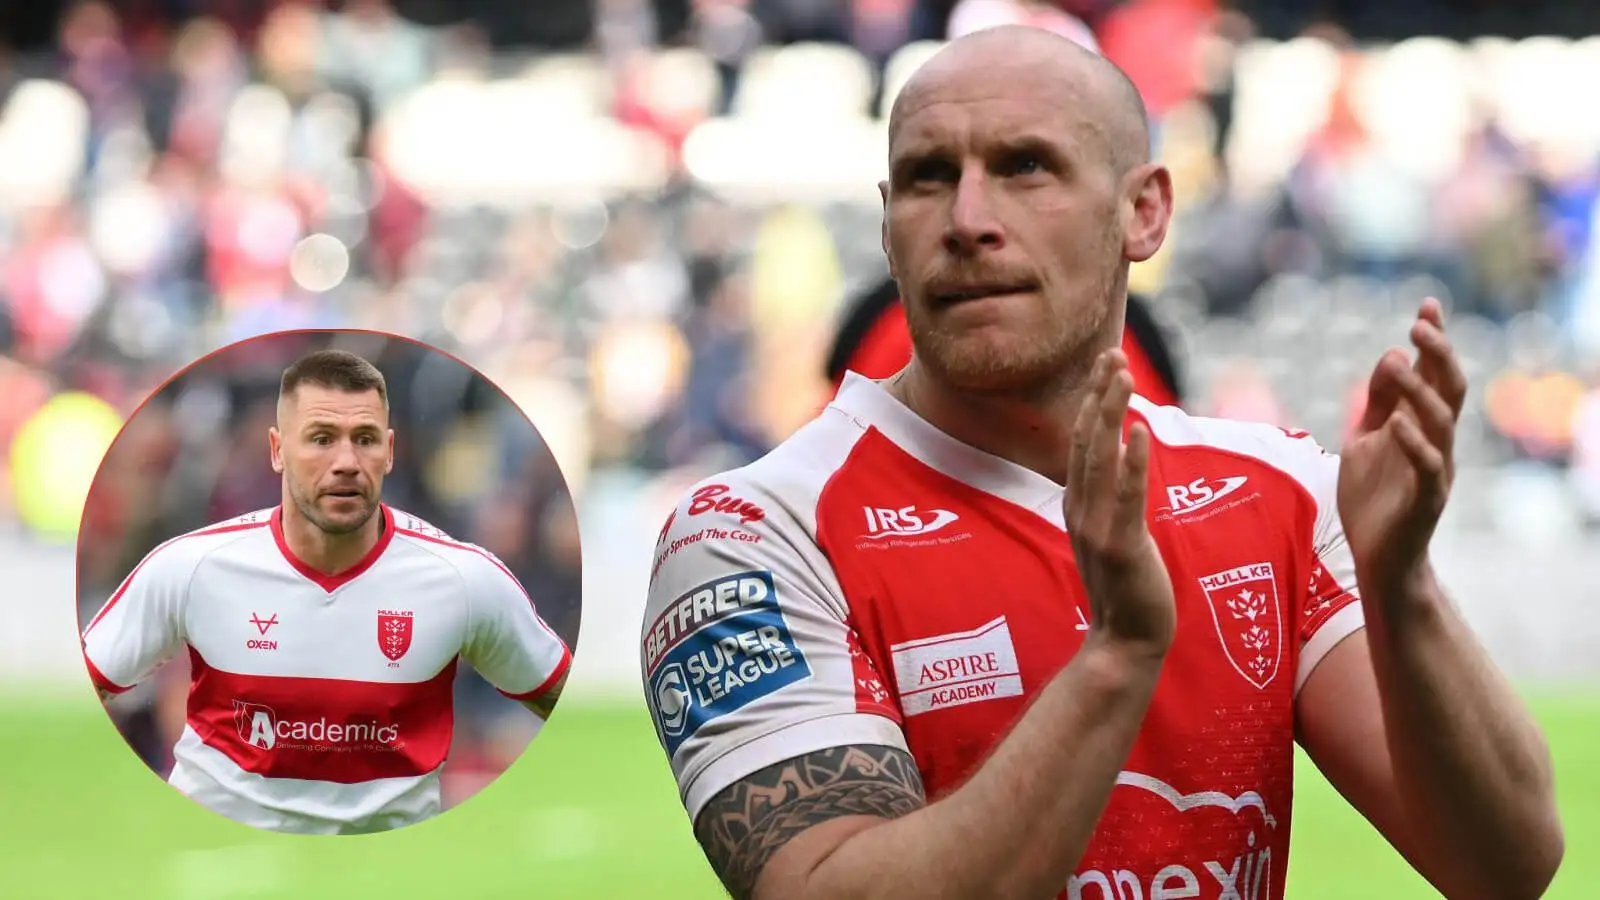 Hull KR man details impact Wembley glory would have, hunger to do it for retiring captain